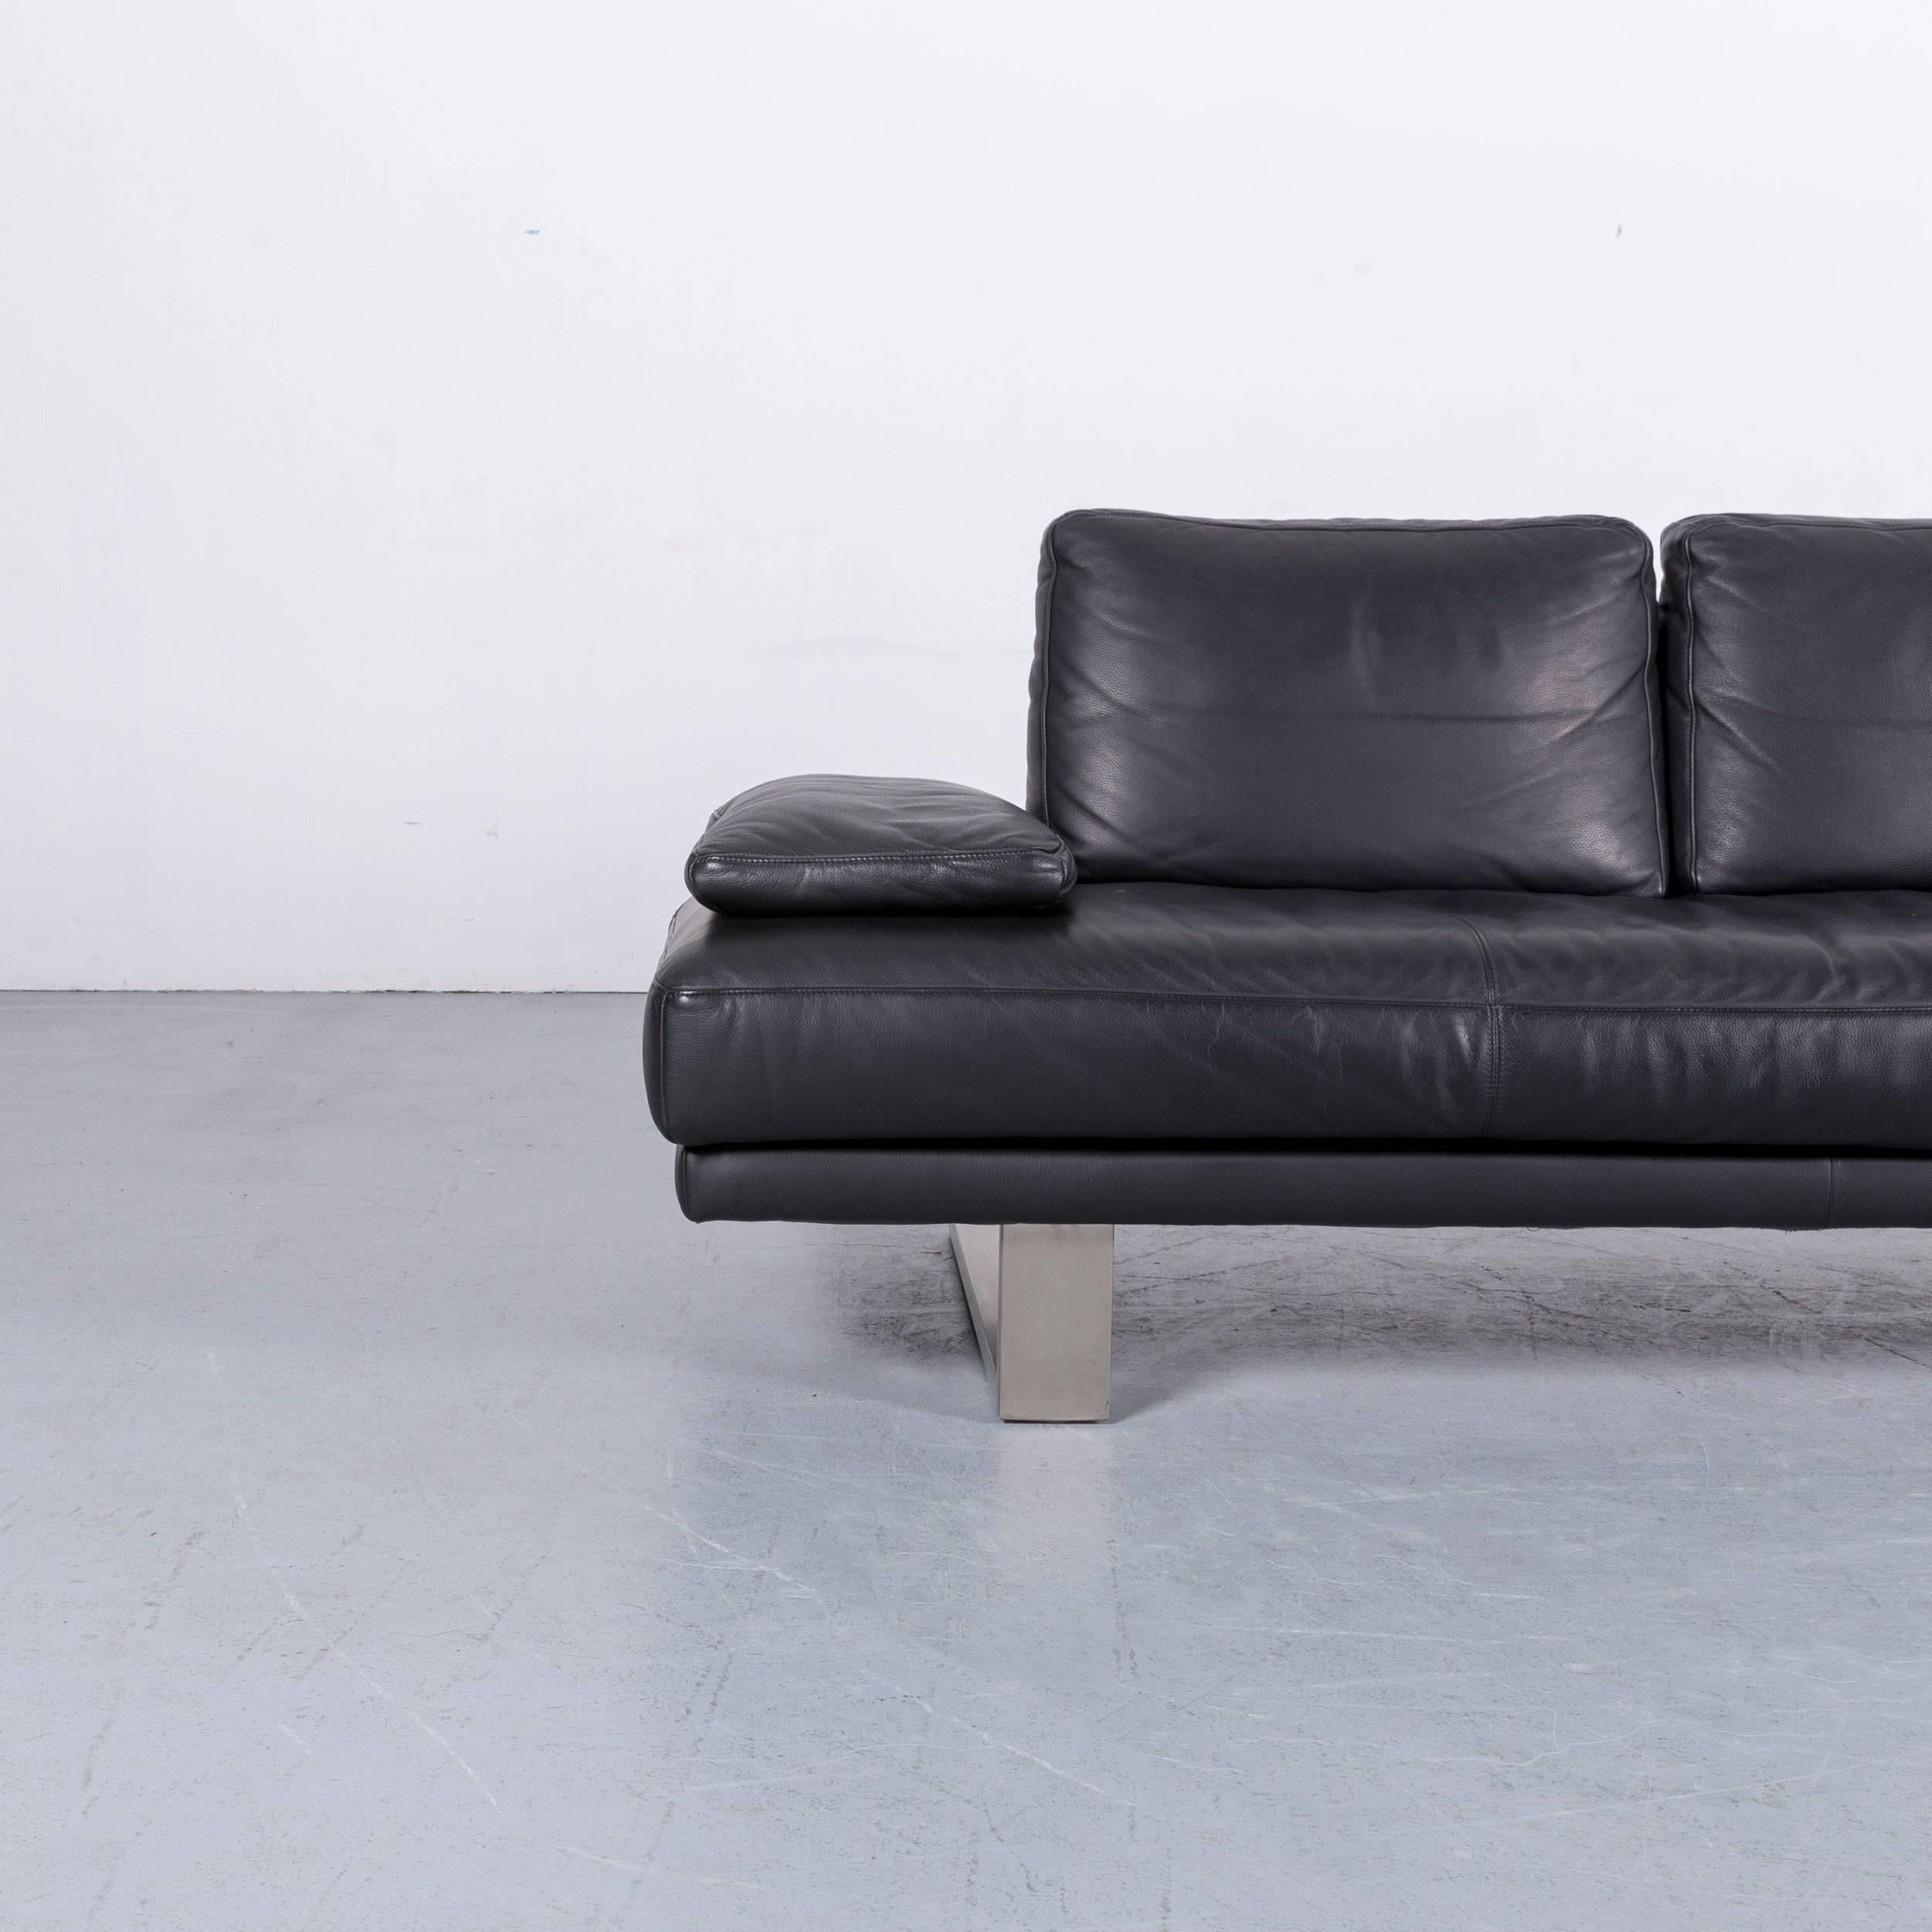 We bring to you an Rolf Benz 6600 designer leather sofa in black two-seat.